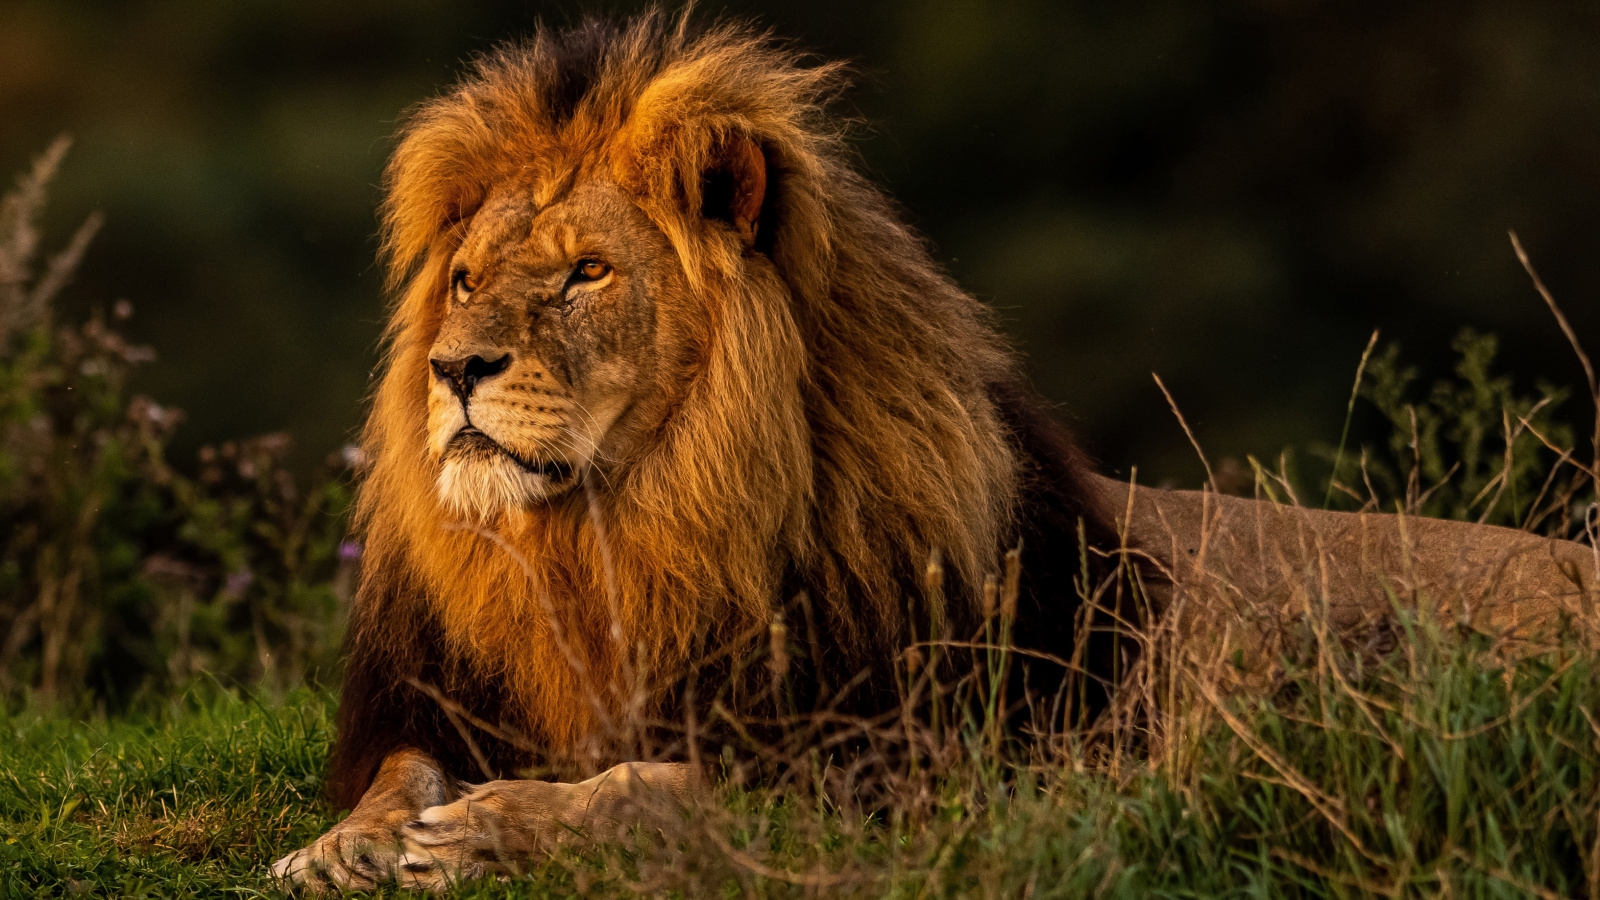 Forest king lion wallpaper 1600x900